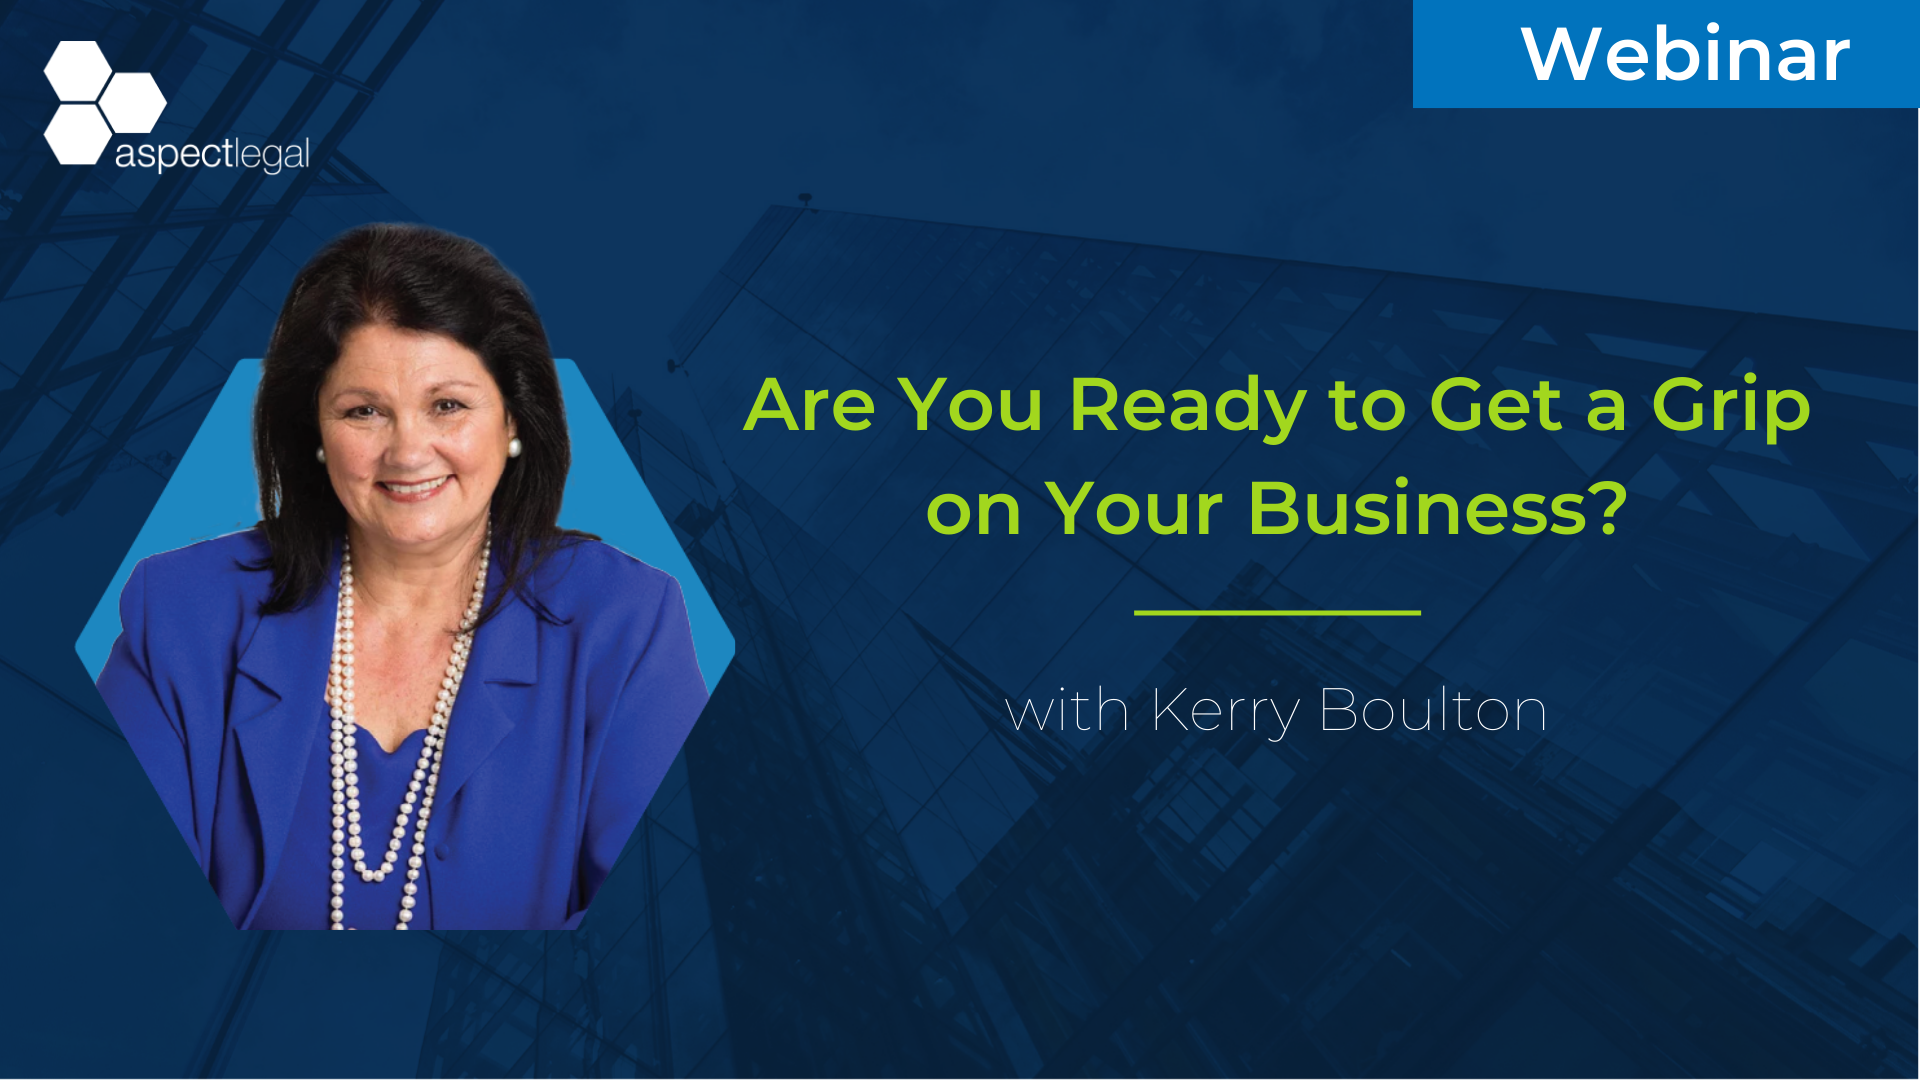 Are You Ready to Get a Grip on Your Business?